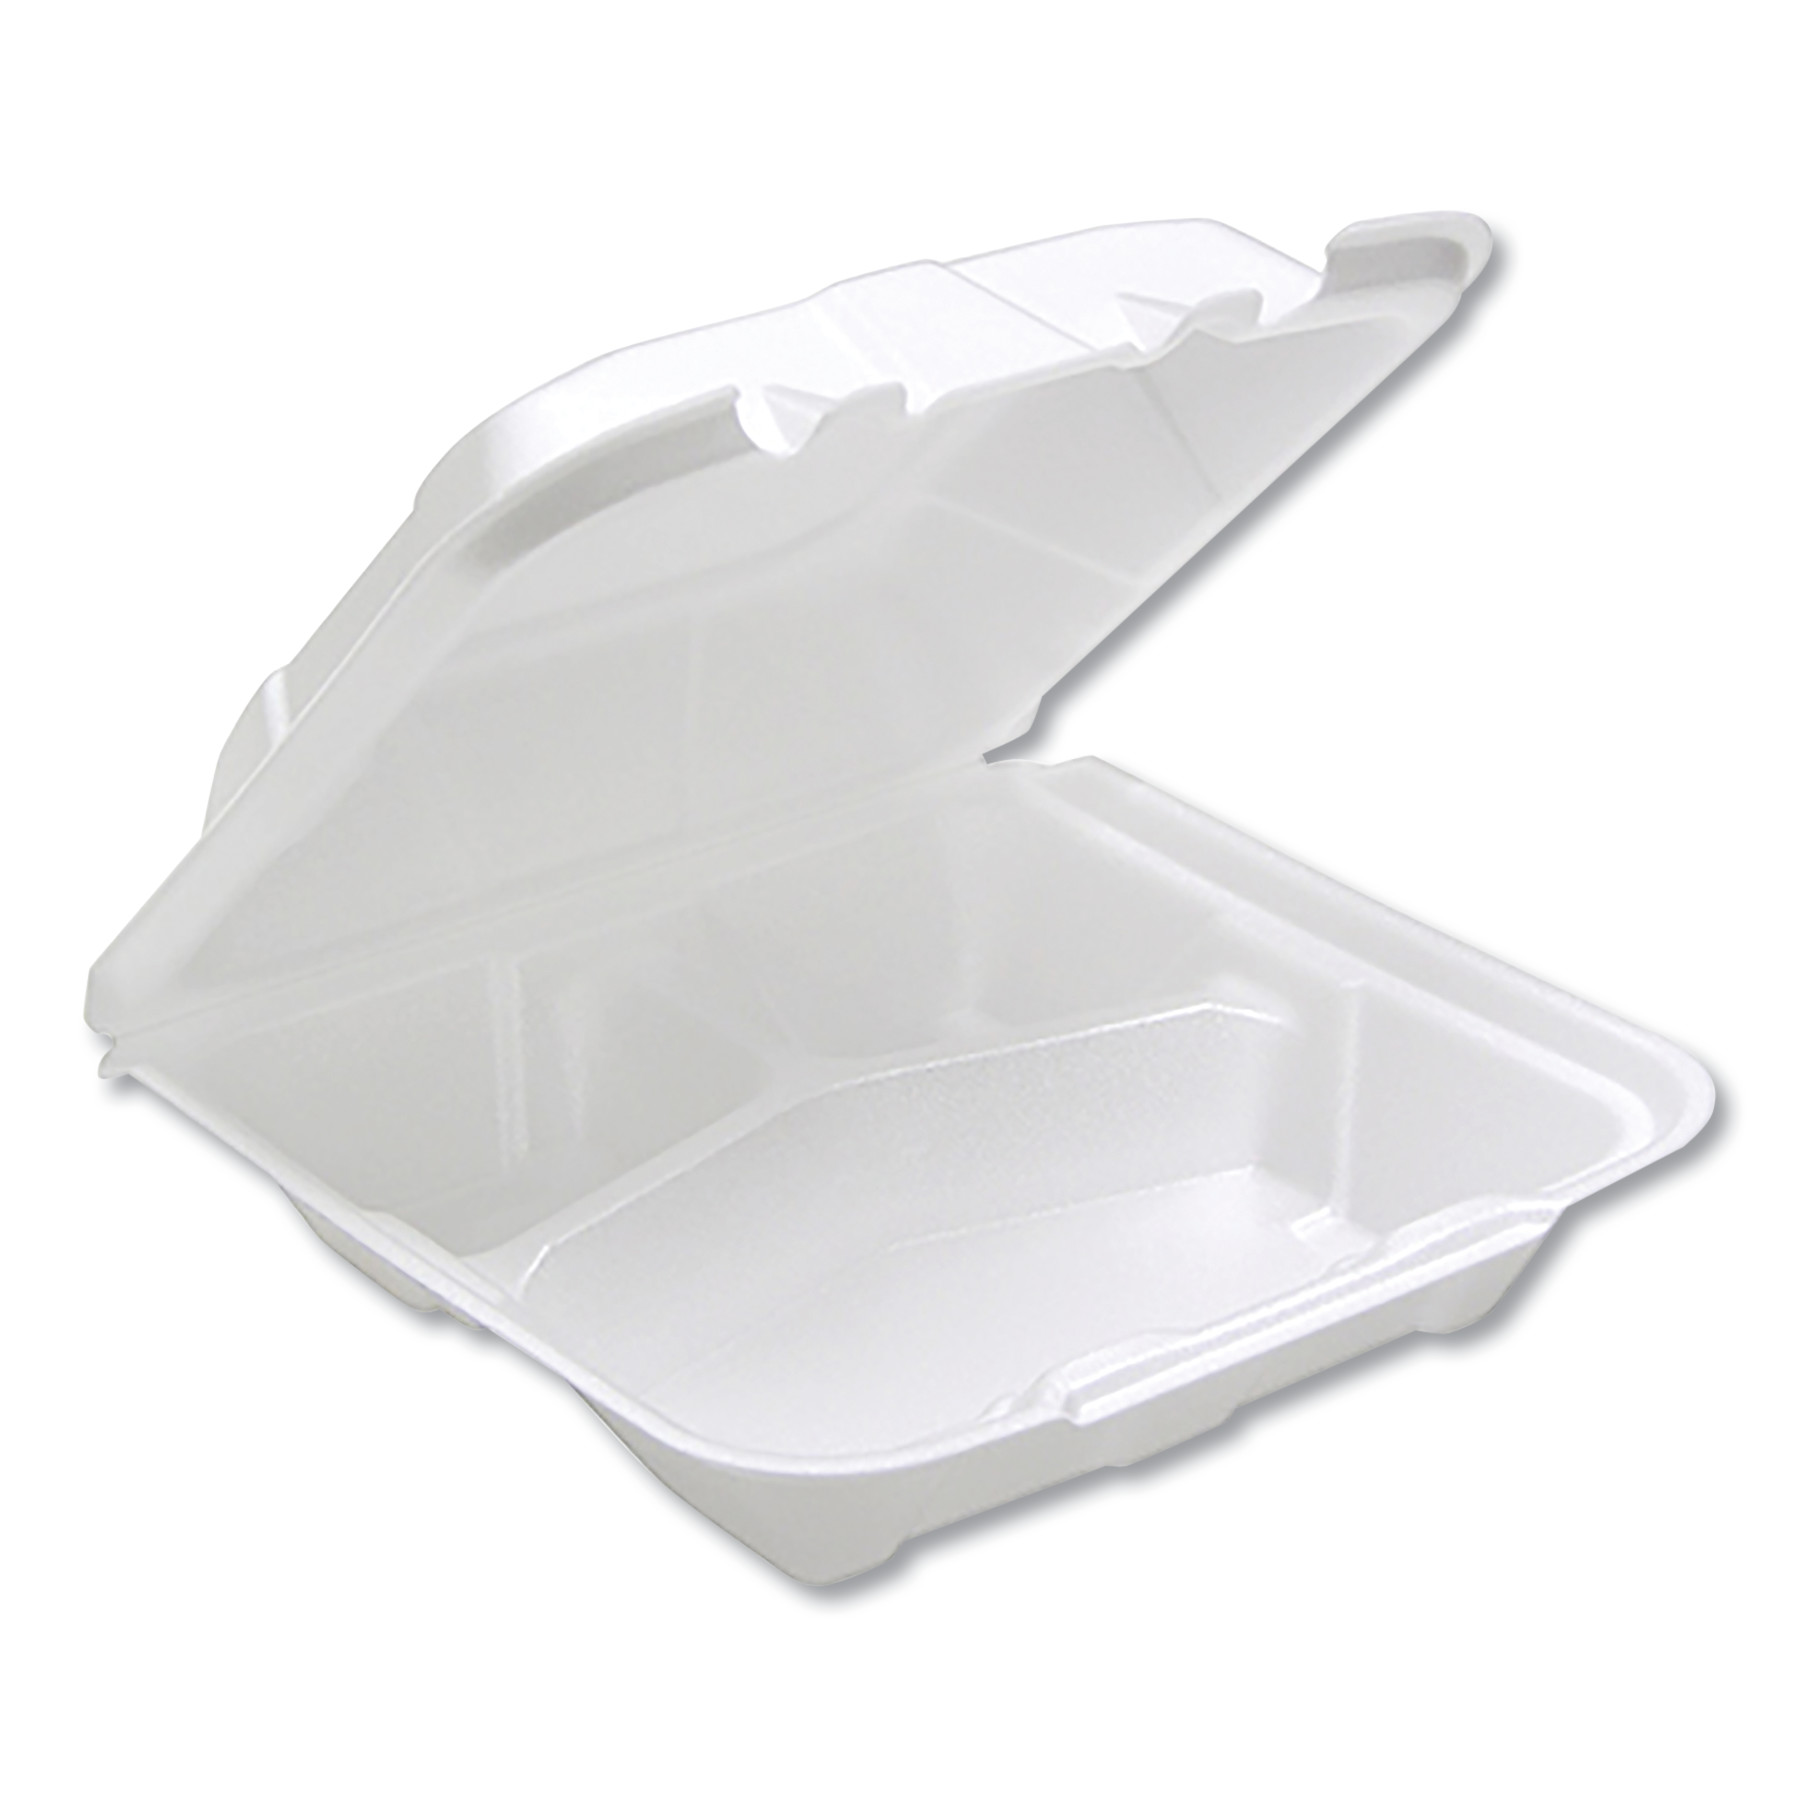  Pactiv YTD188010000 Foam Hinged Lid Containers, White, 8.14 x 8.42, 1-Compartment, 150/Carton (PCTYTD18801) 